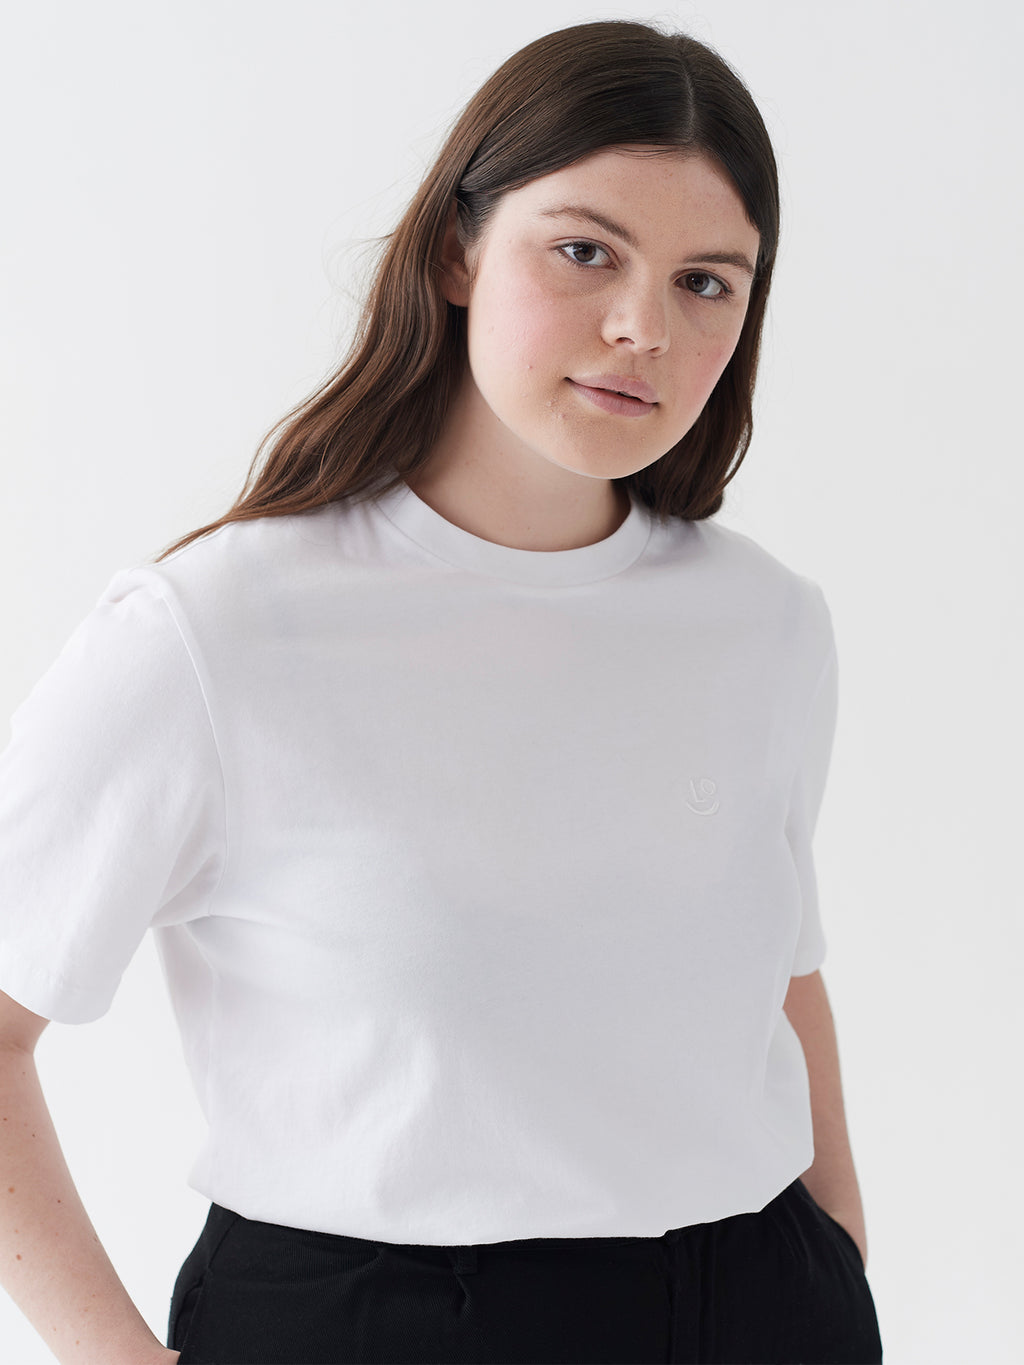 LO Classic Fit Tee